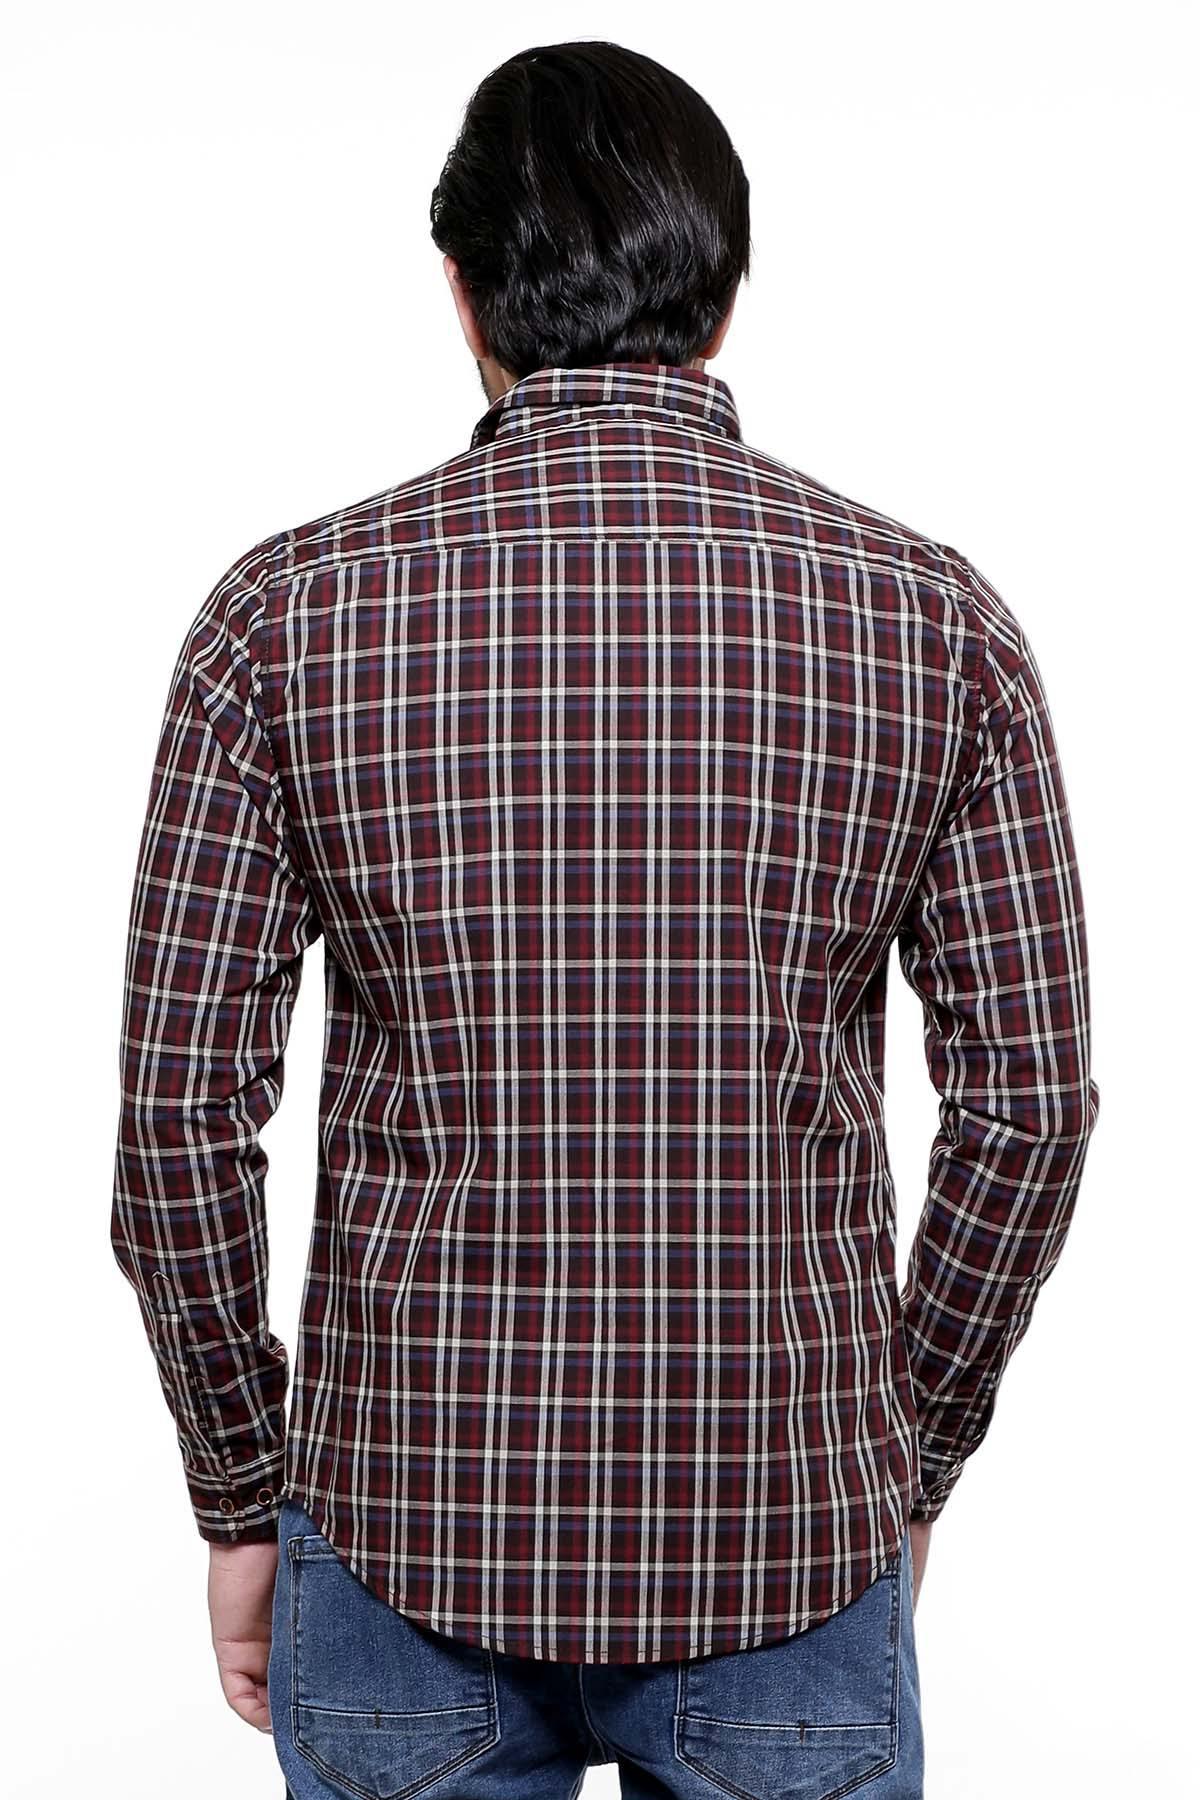 CASUAL SHIRT FULL SLEEVE CHOCOLATE BROWN SLIM FIT at Charcoal Clothing